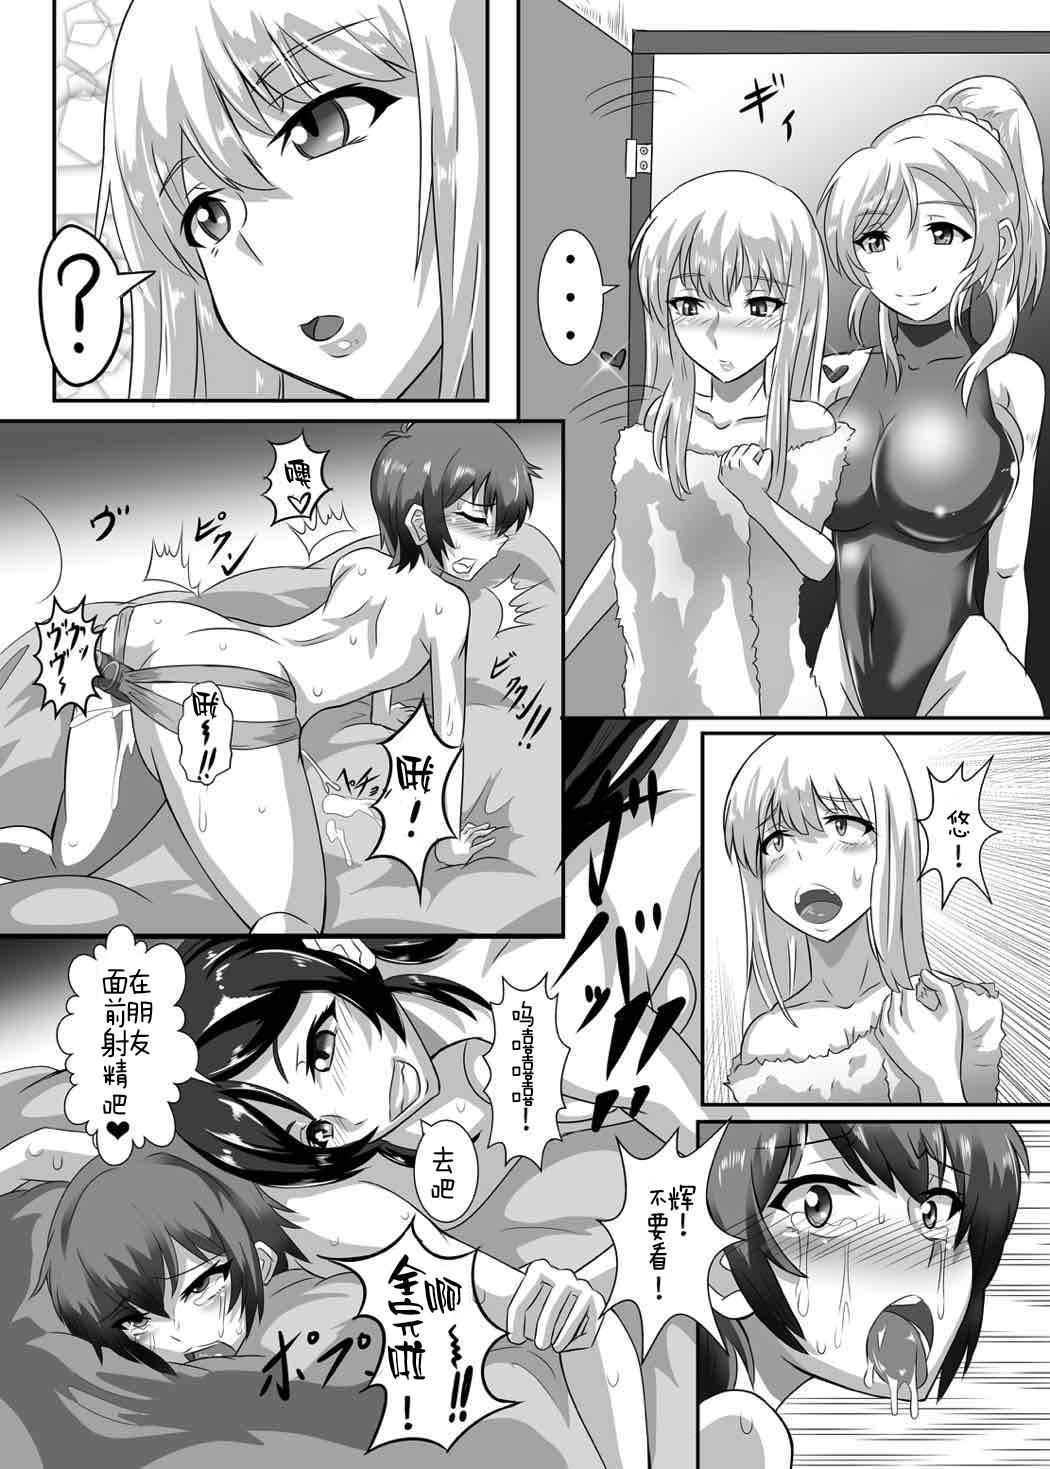 Doggy Style Porn Gehenna - Love live X - Page 12